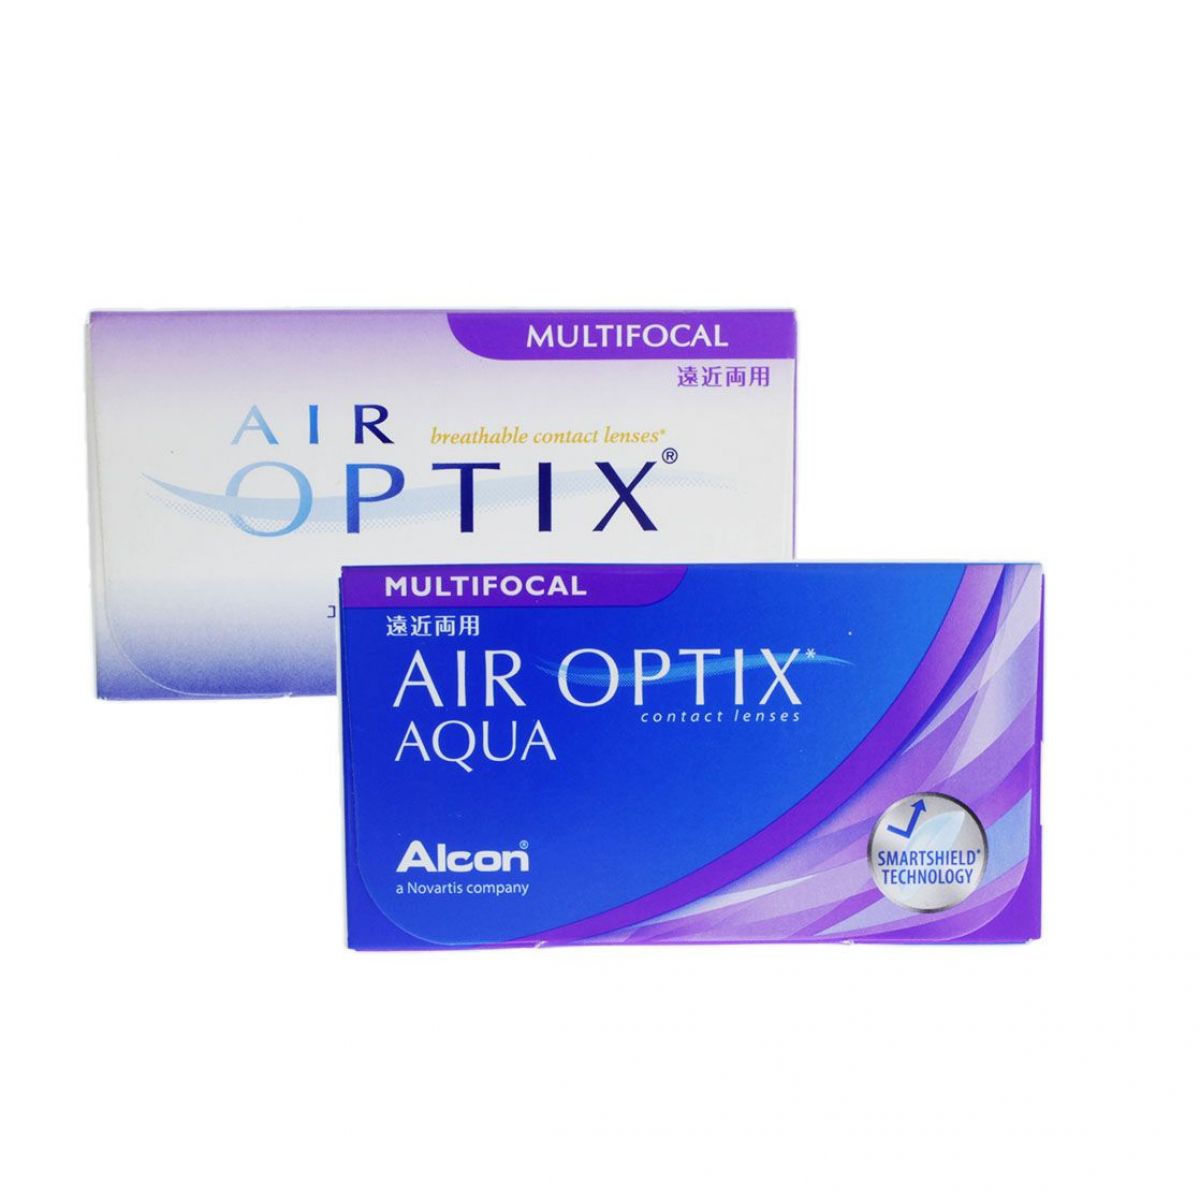 AIR OPTIX AQUA MULTIFOCAL MONTHLY DISPOSABLE SILICON HYDROGEL MULTIFOCAL CONTACT LENSES (6 LENSES)